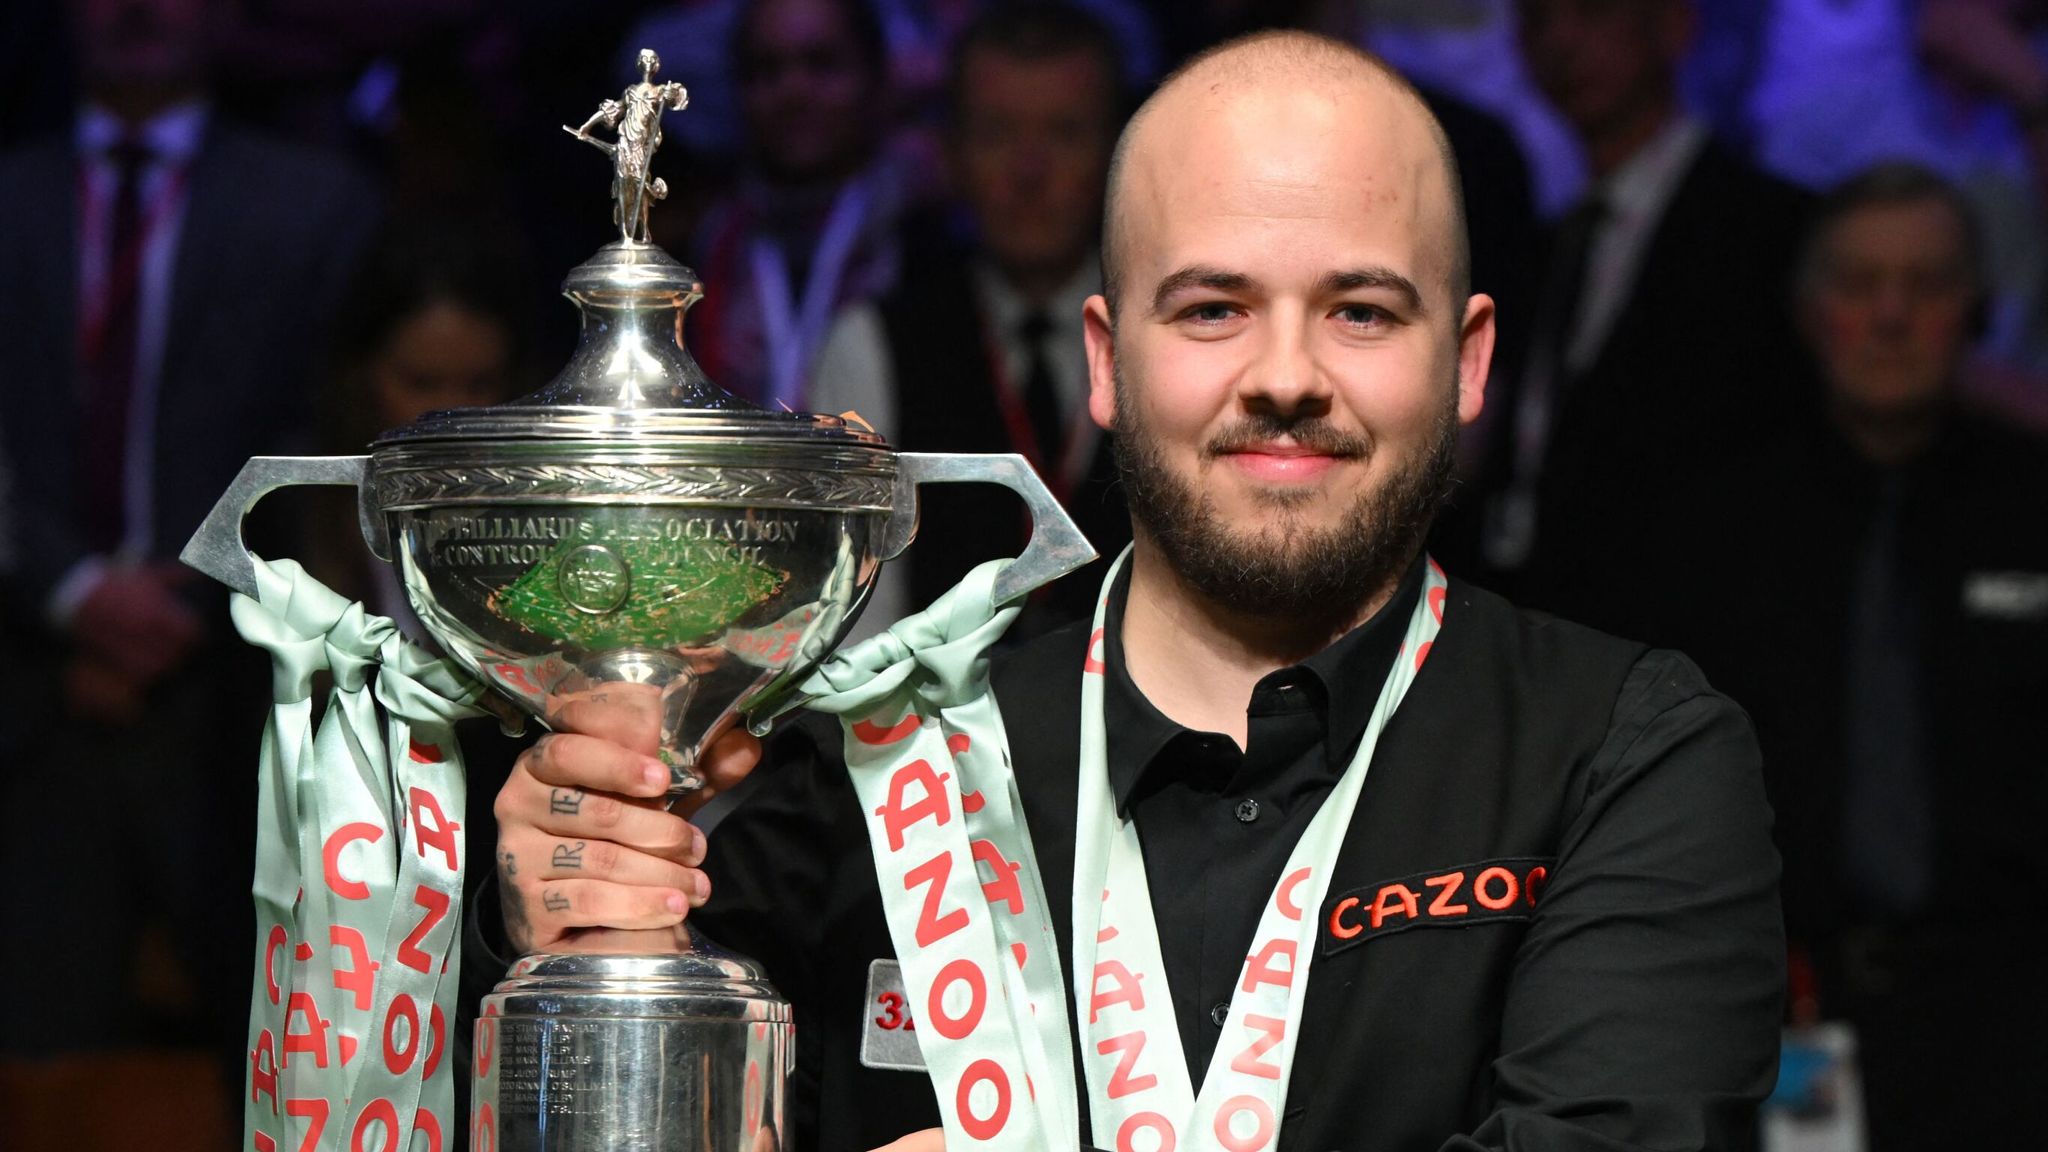 World Snooker Championship: Luca Brecel holds off Mark Selby